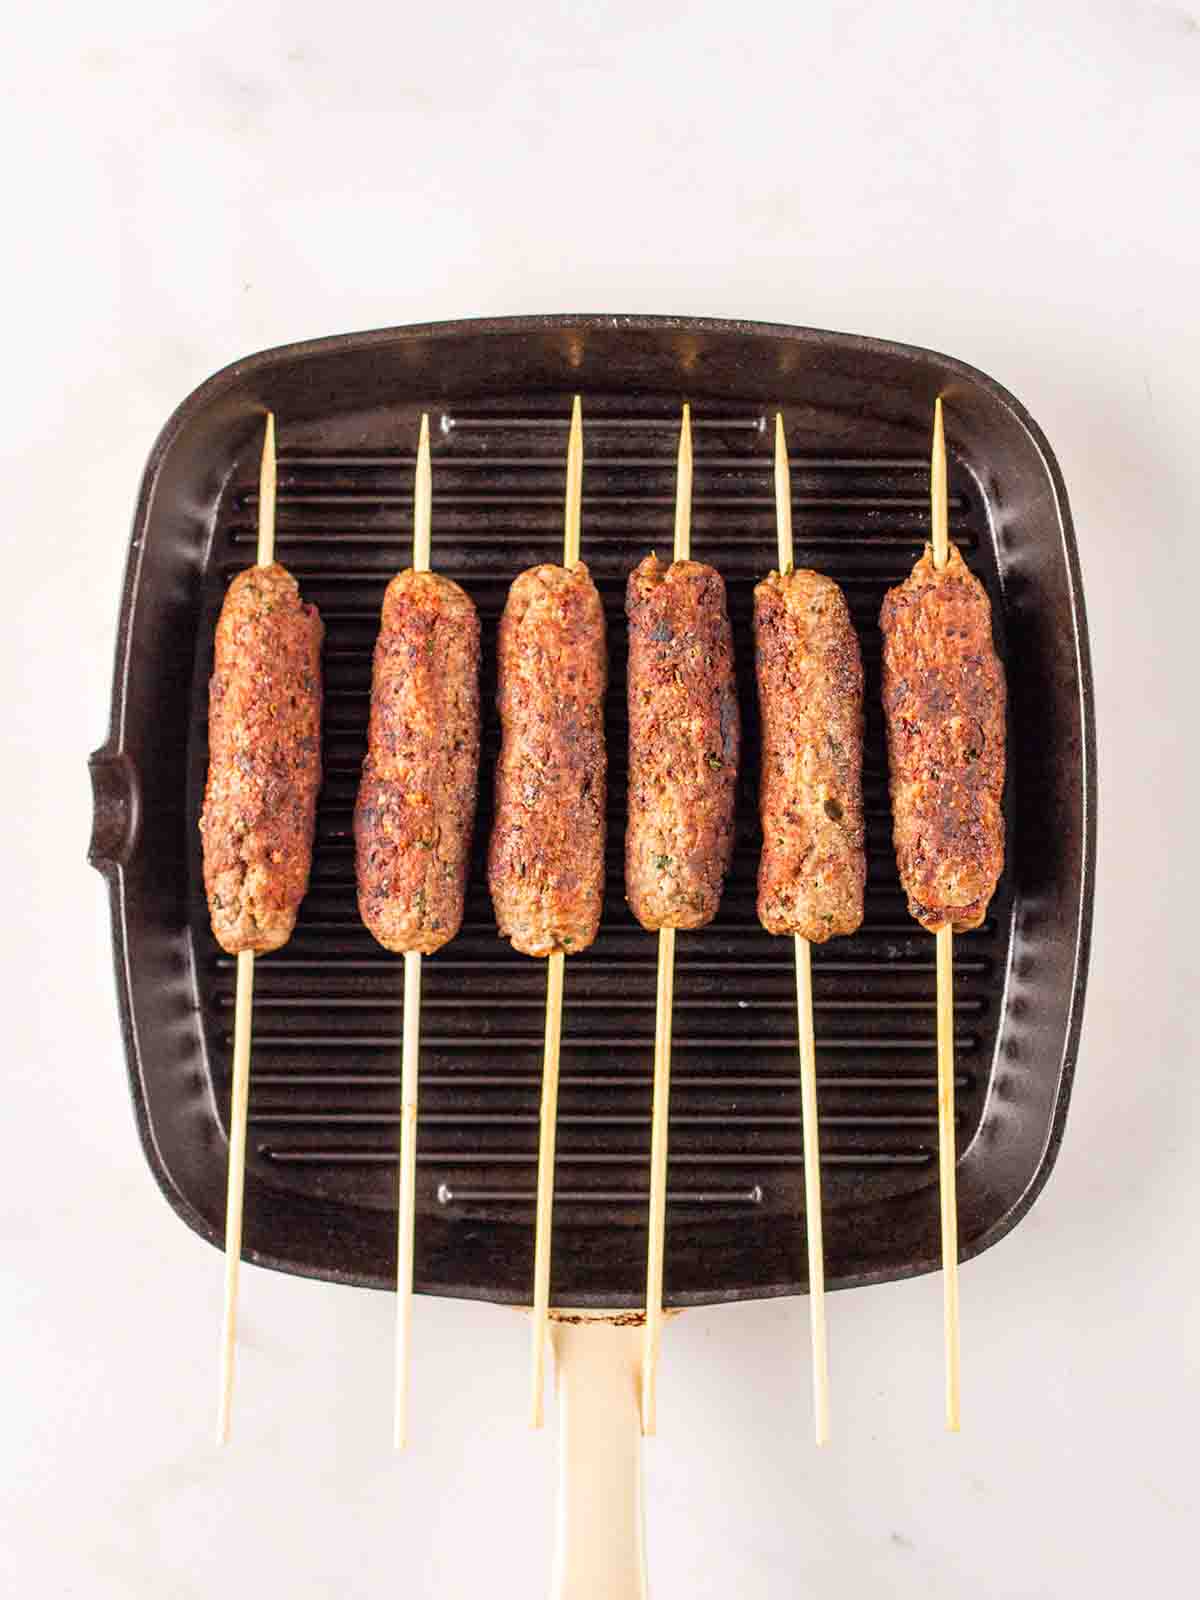 Lamb mince koftas with skewers cooking on a griddle pan for step 3 in the recipe method.